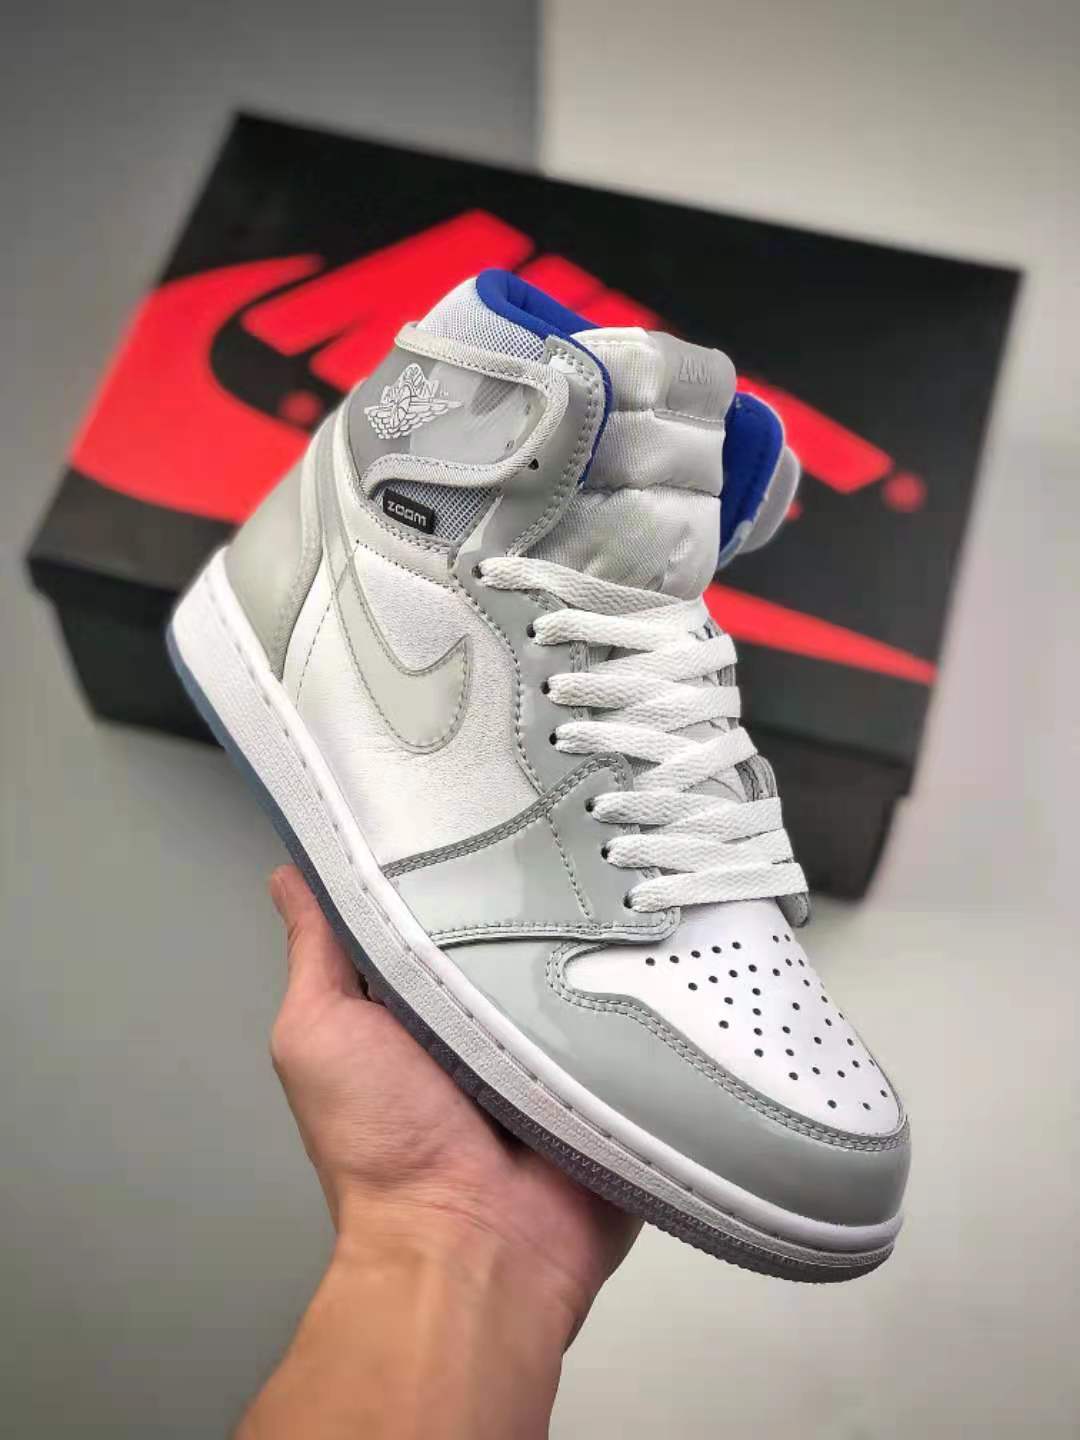 Air Jordan 1 High Zoom 'Racer Blue' CK6637-104: Stylish and Iconic Sneaker for the Modern Athlete